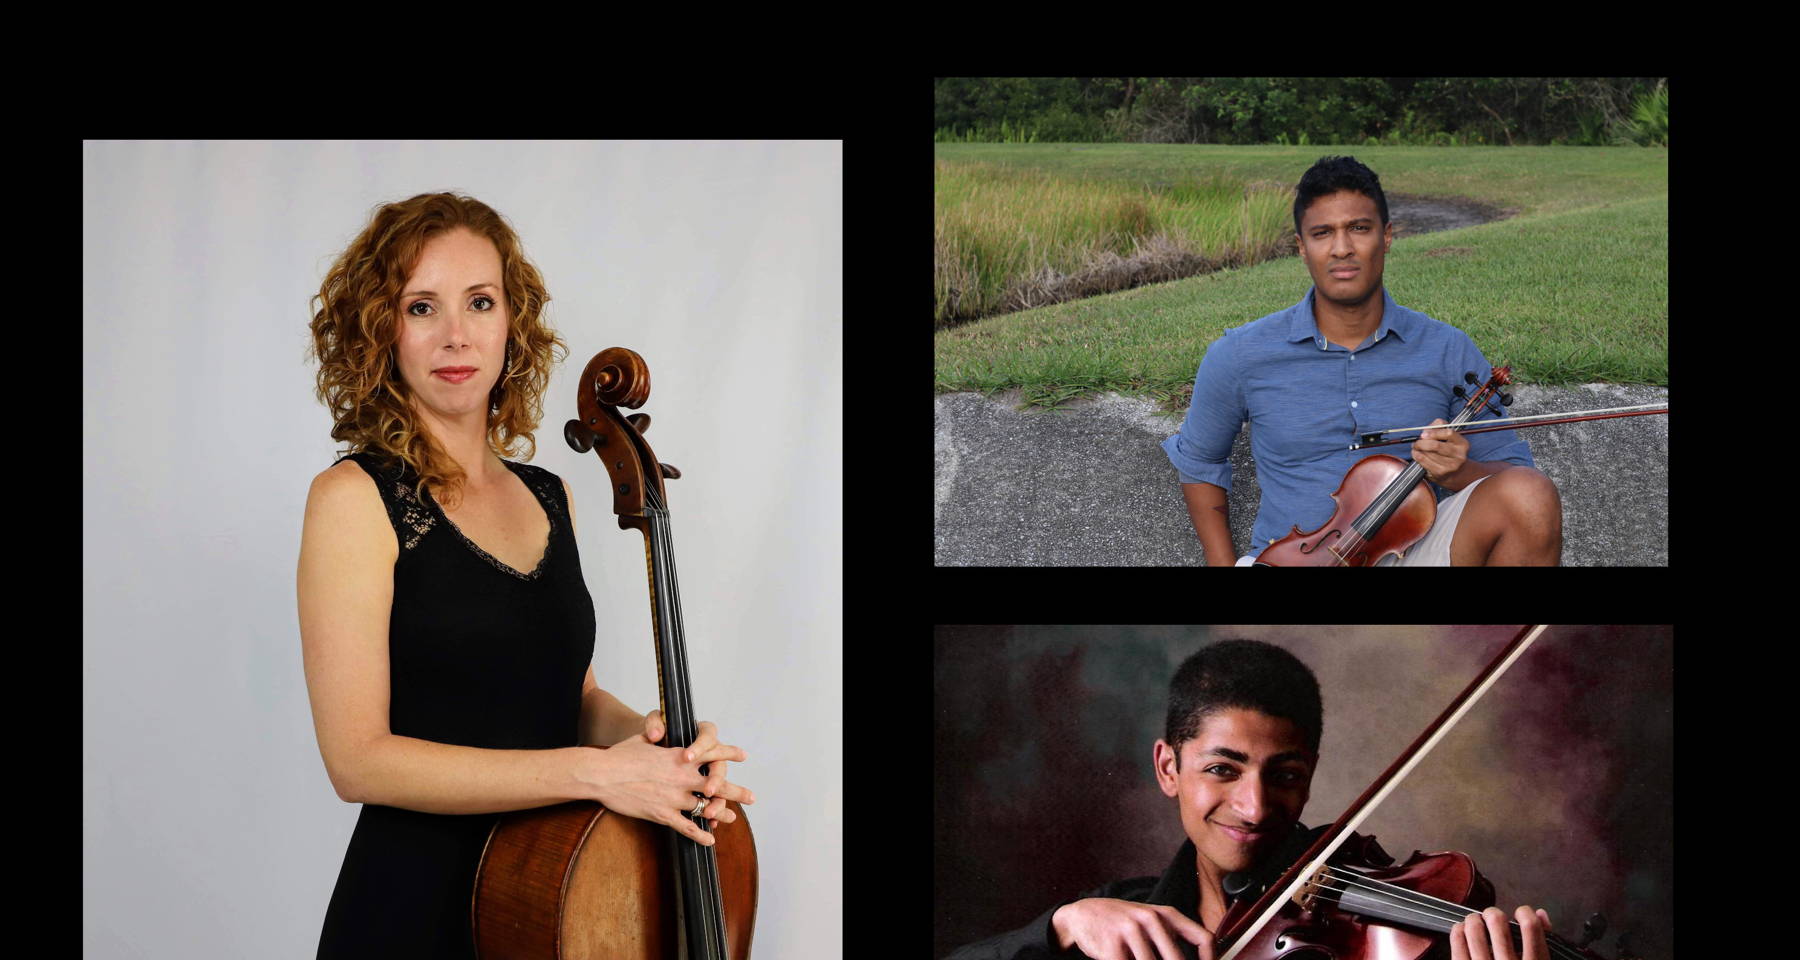 Equinoxes and Solstices: Music For Two Violins And Cello With Kyle Walcott And Friends